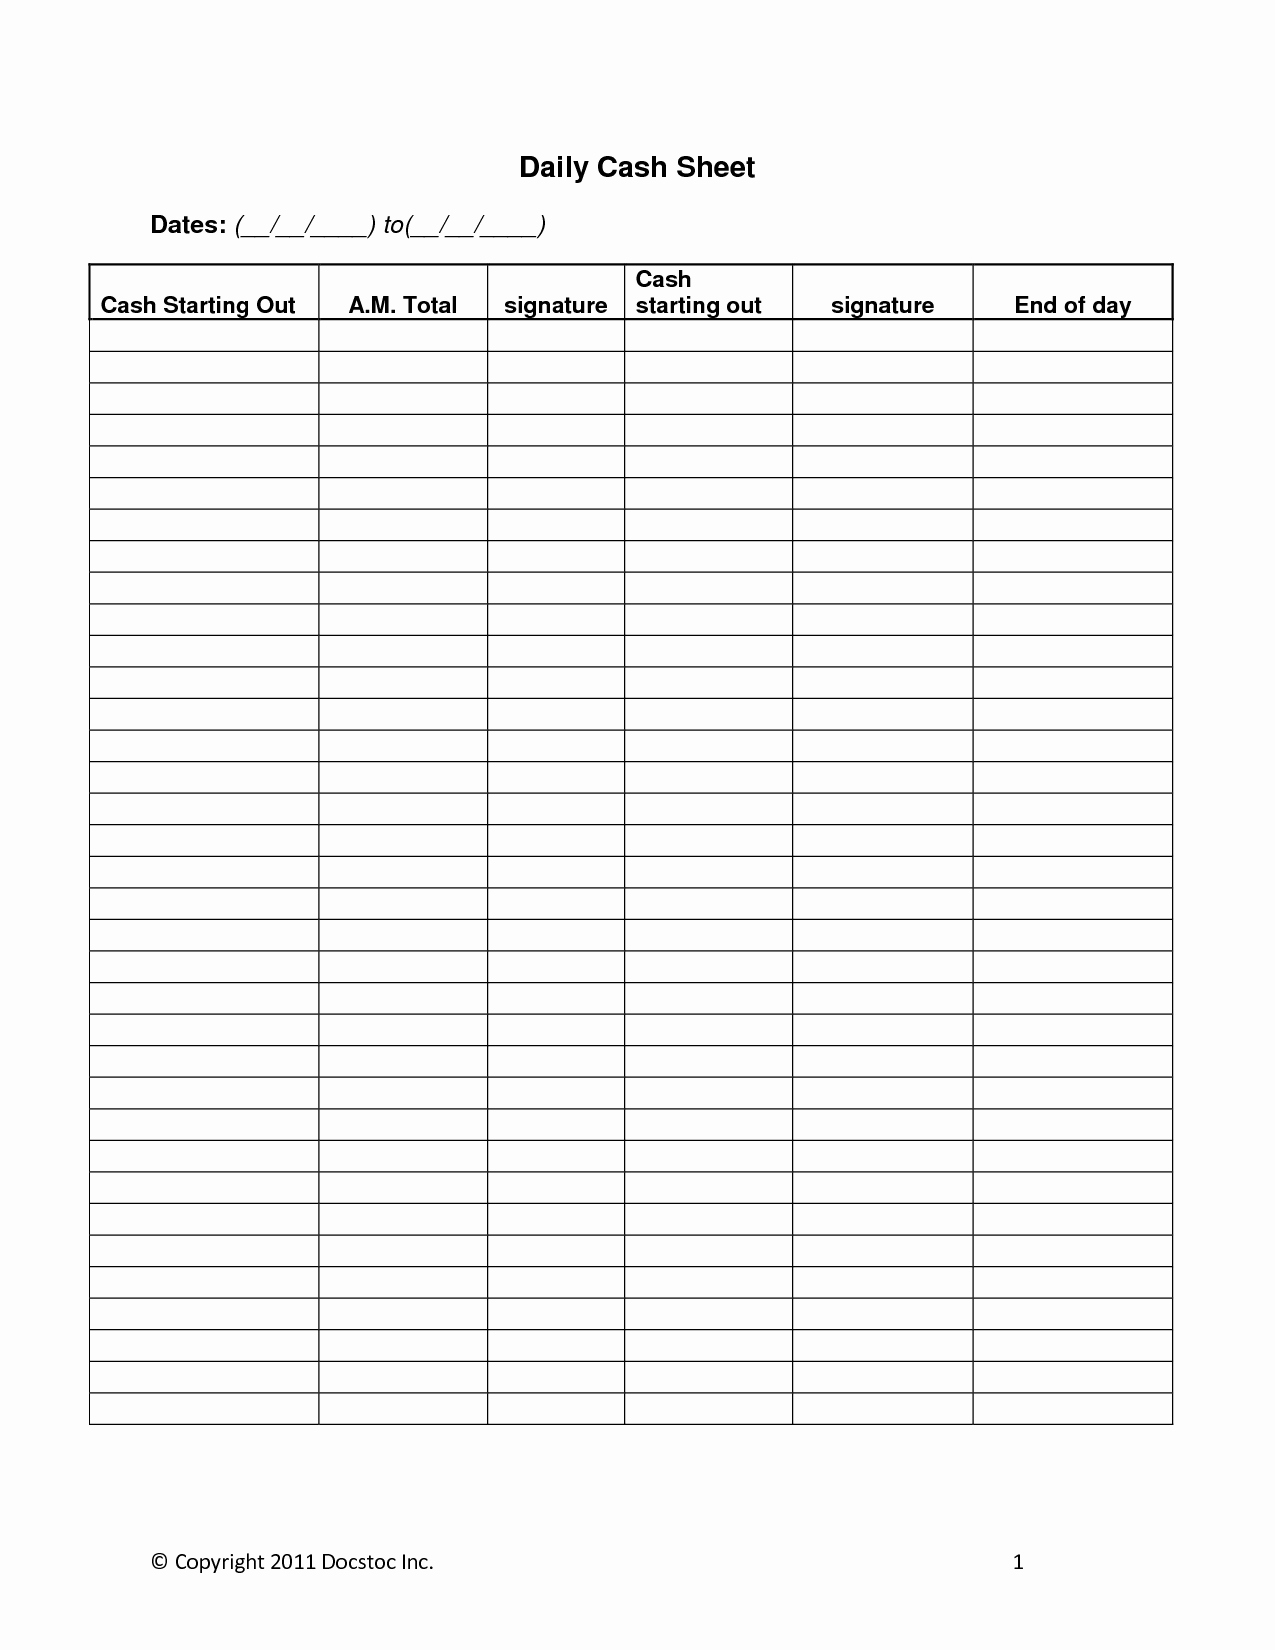 Cash In Cash Out Template Fresh Best S Of Daily Cash Sheet Template Excel Cash